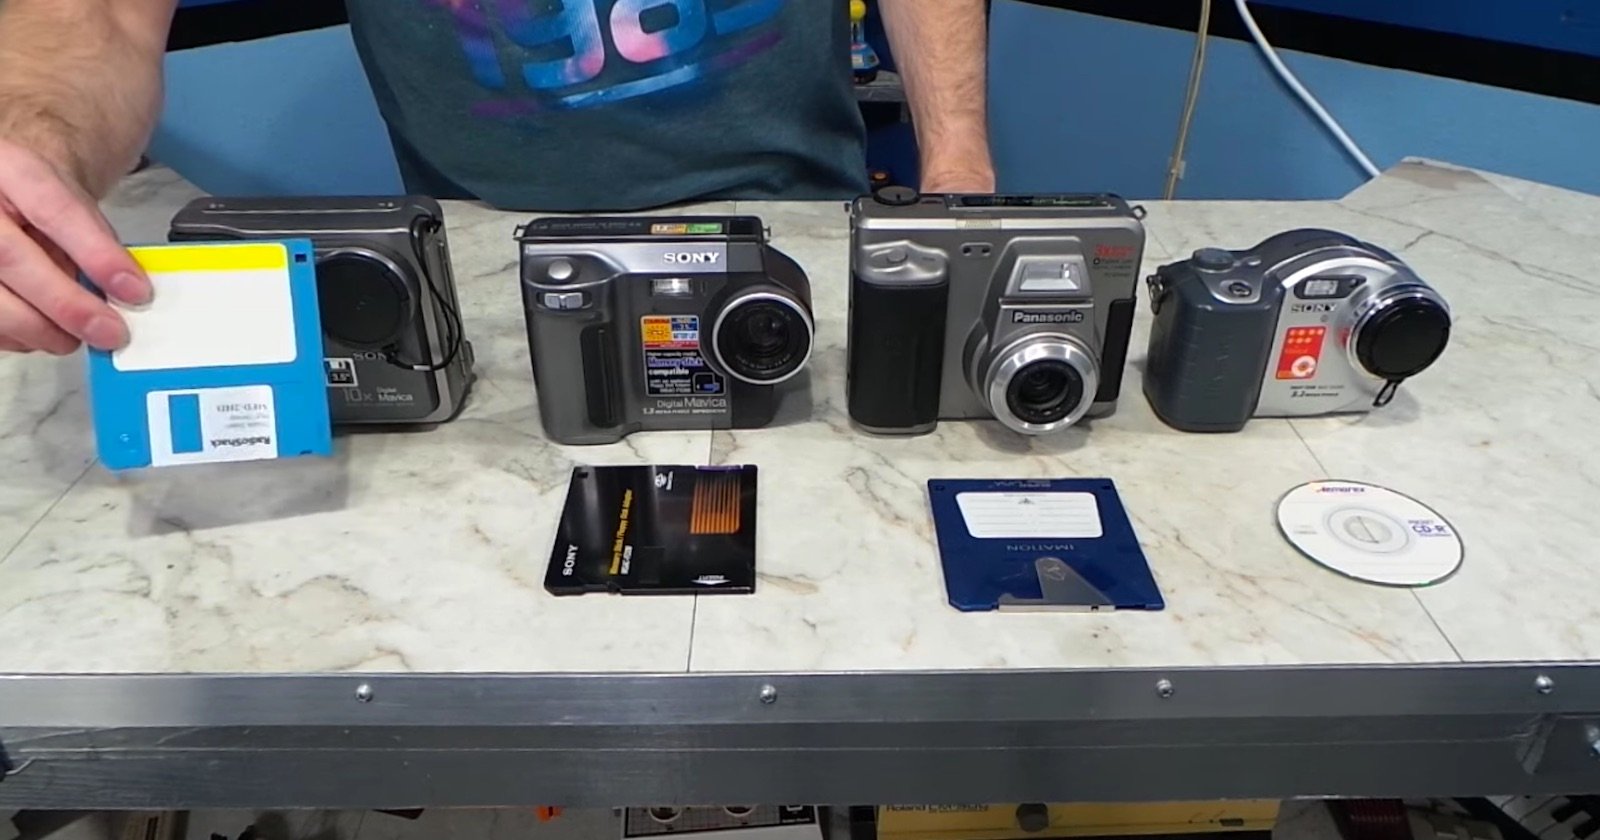 A Look Back at the Digital Cameras that Used Floppy Disks